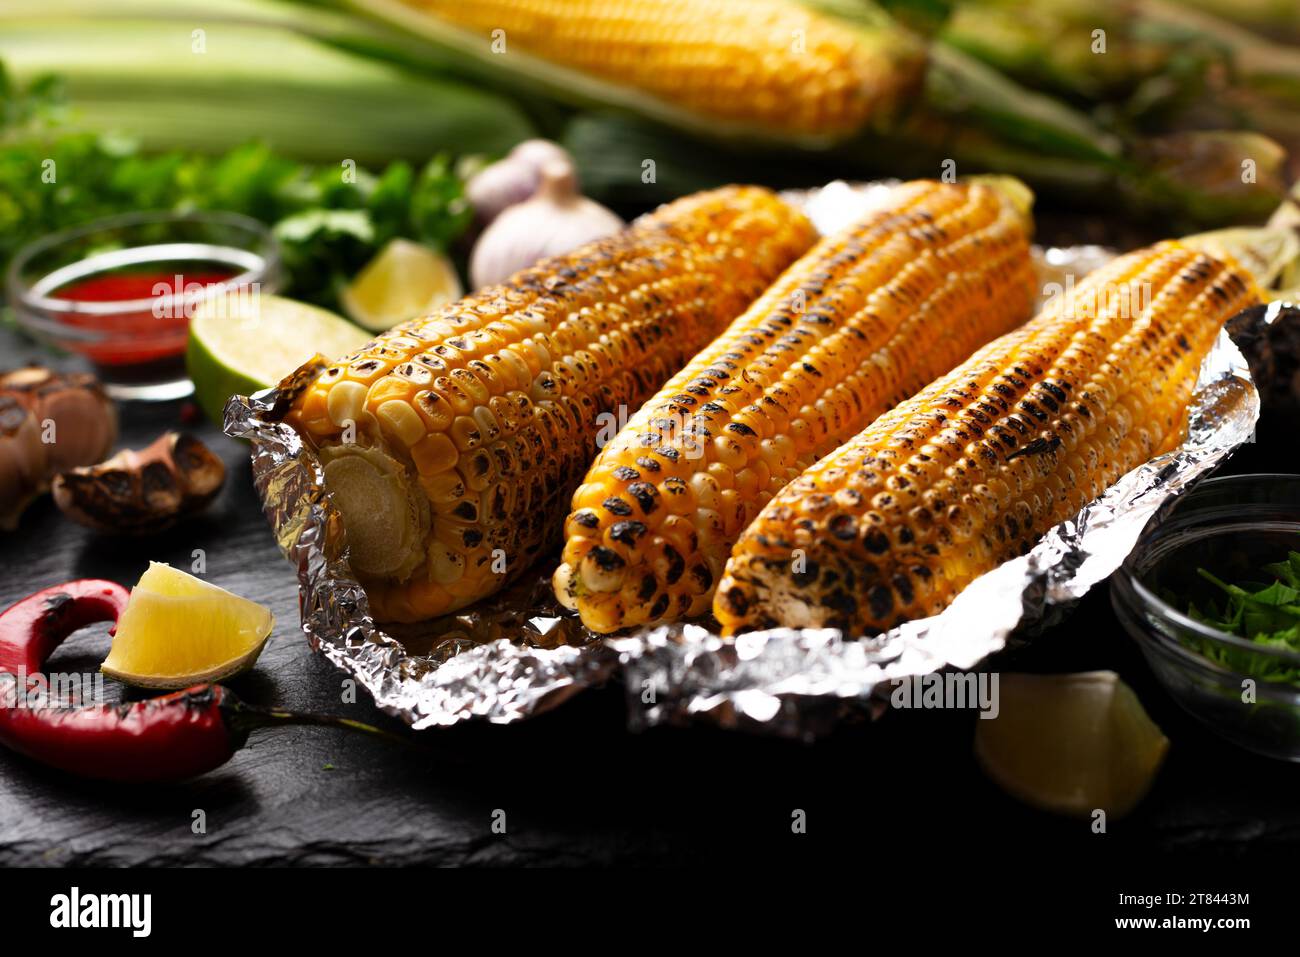 Grilled corn on the cob in tin foil on kitchen table healthy gluten free food background Stock Photo